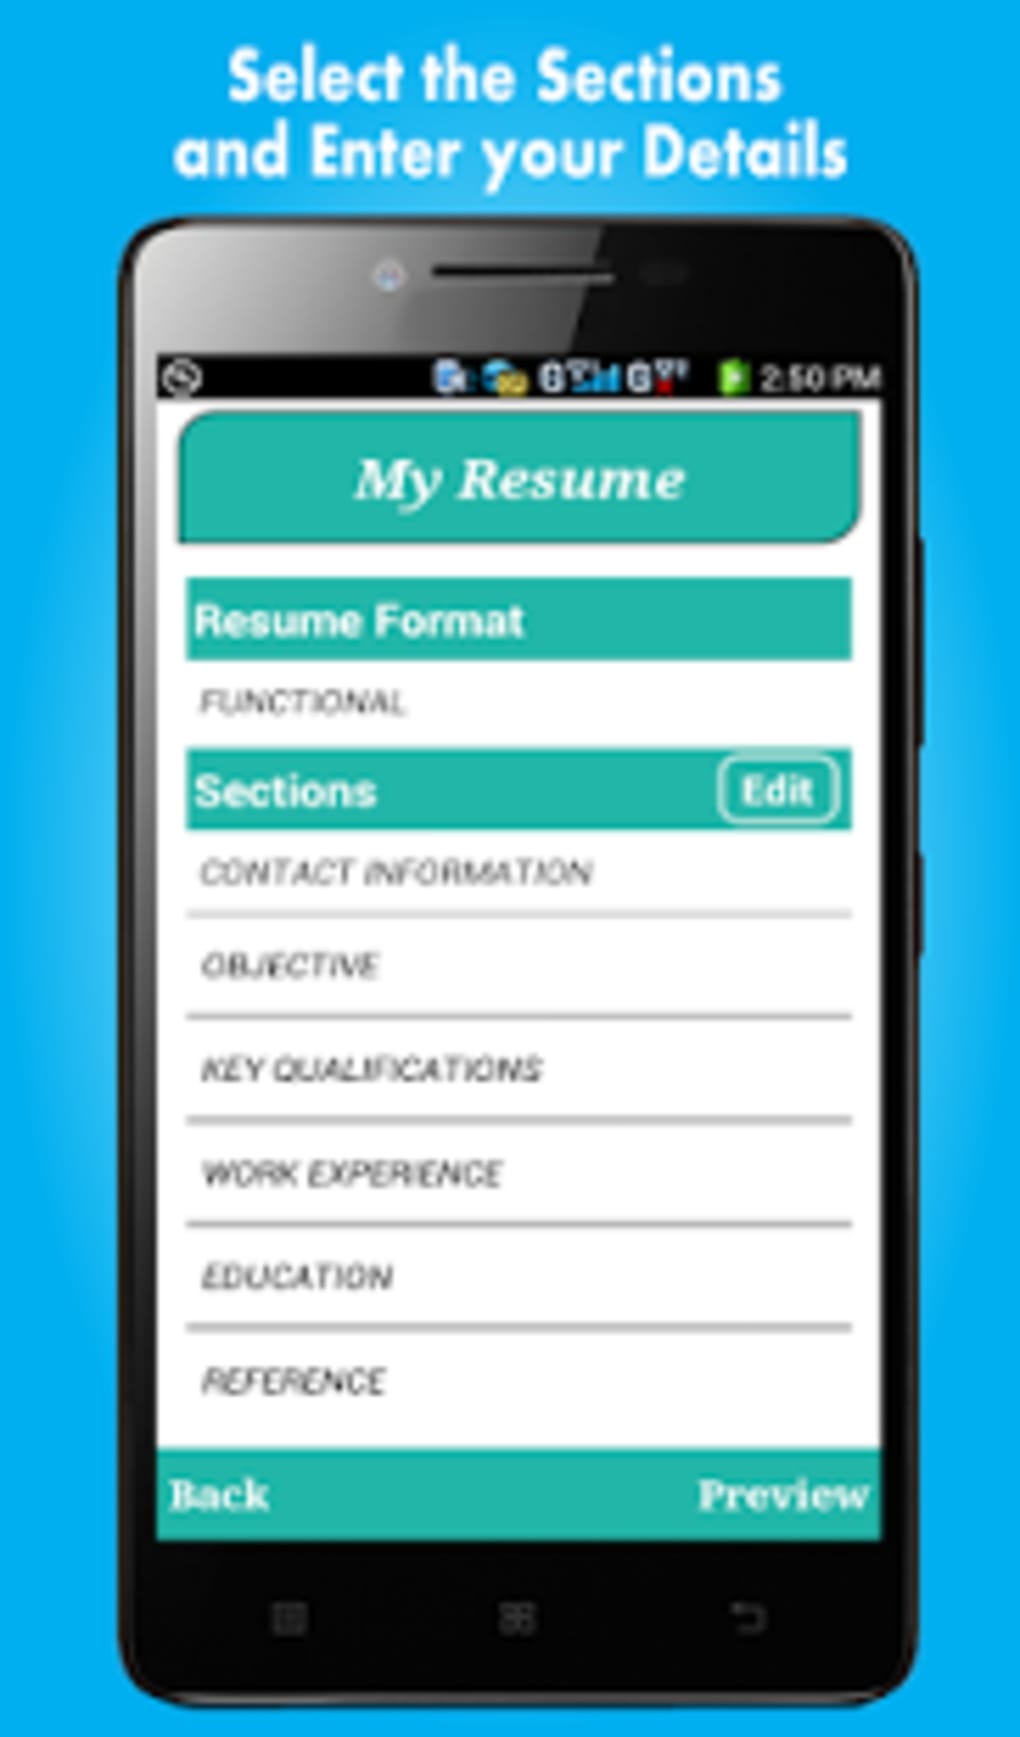 smart resume builder    cv free for android